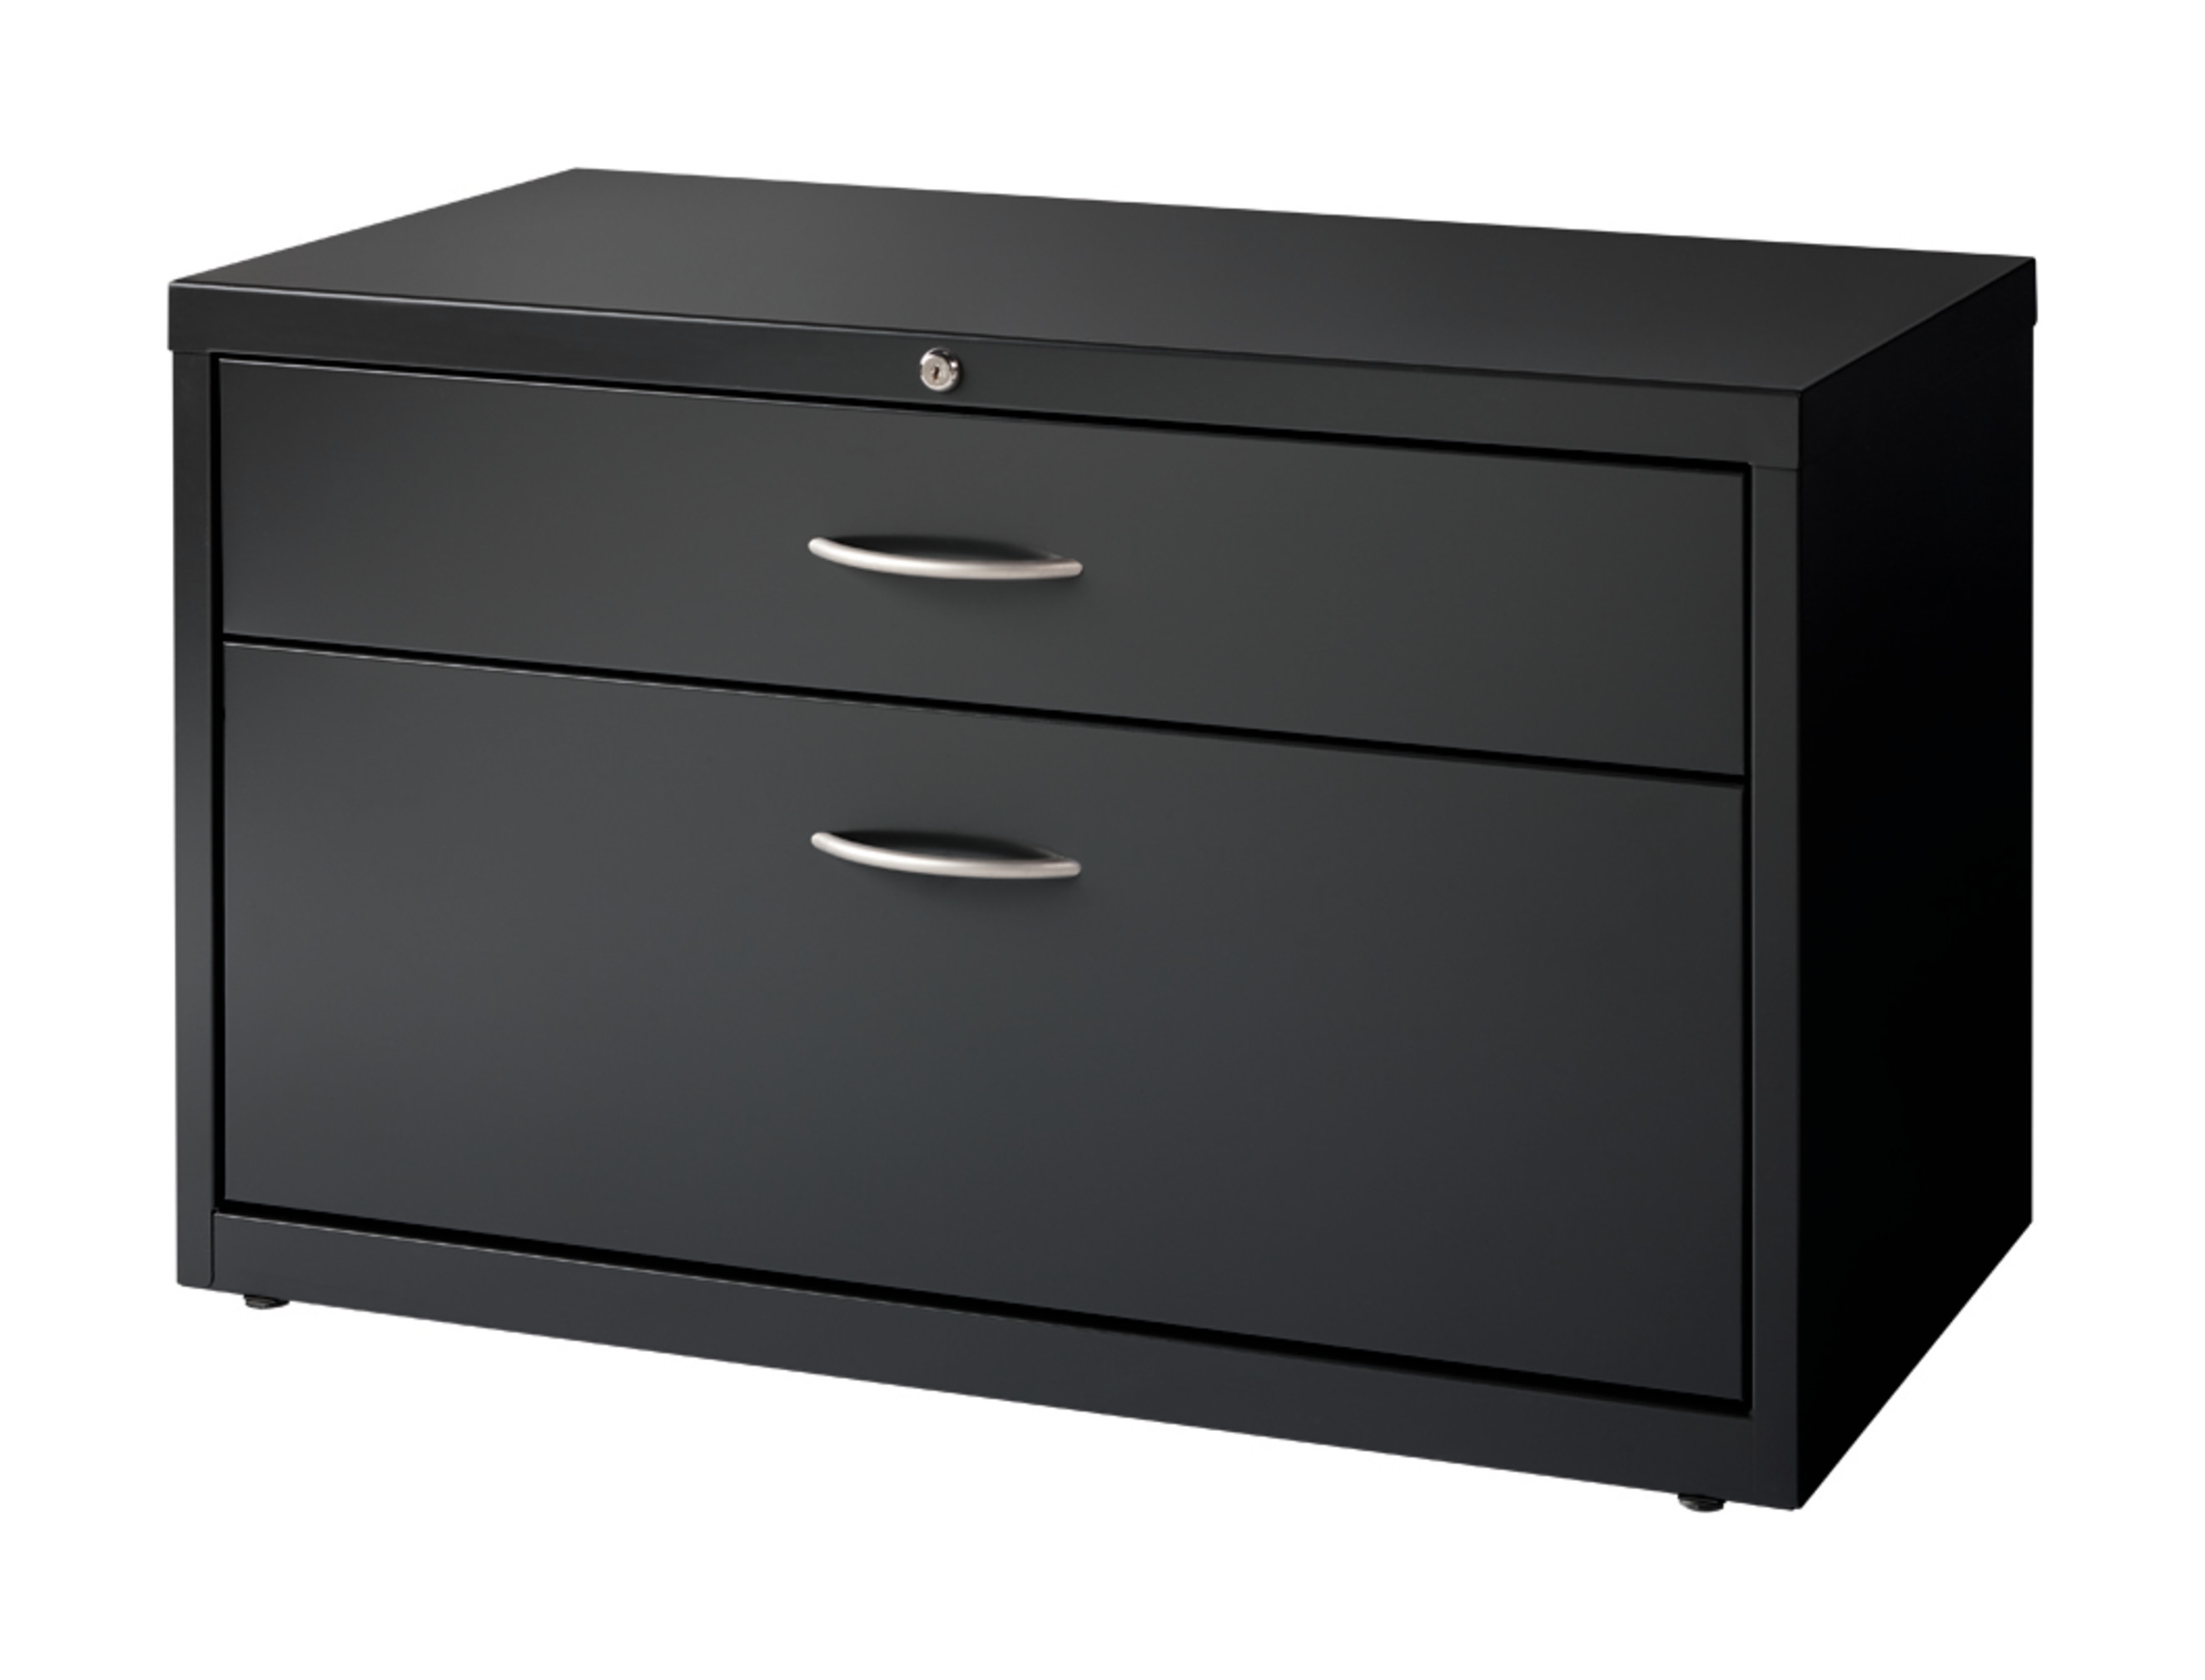 Hirsh Industries B2248135 36 in. Low Credenza with Box & File Drawers - Charcoal - image 3 of 13